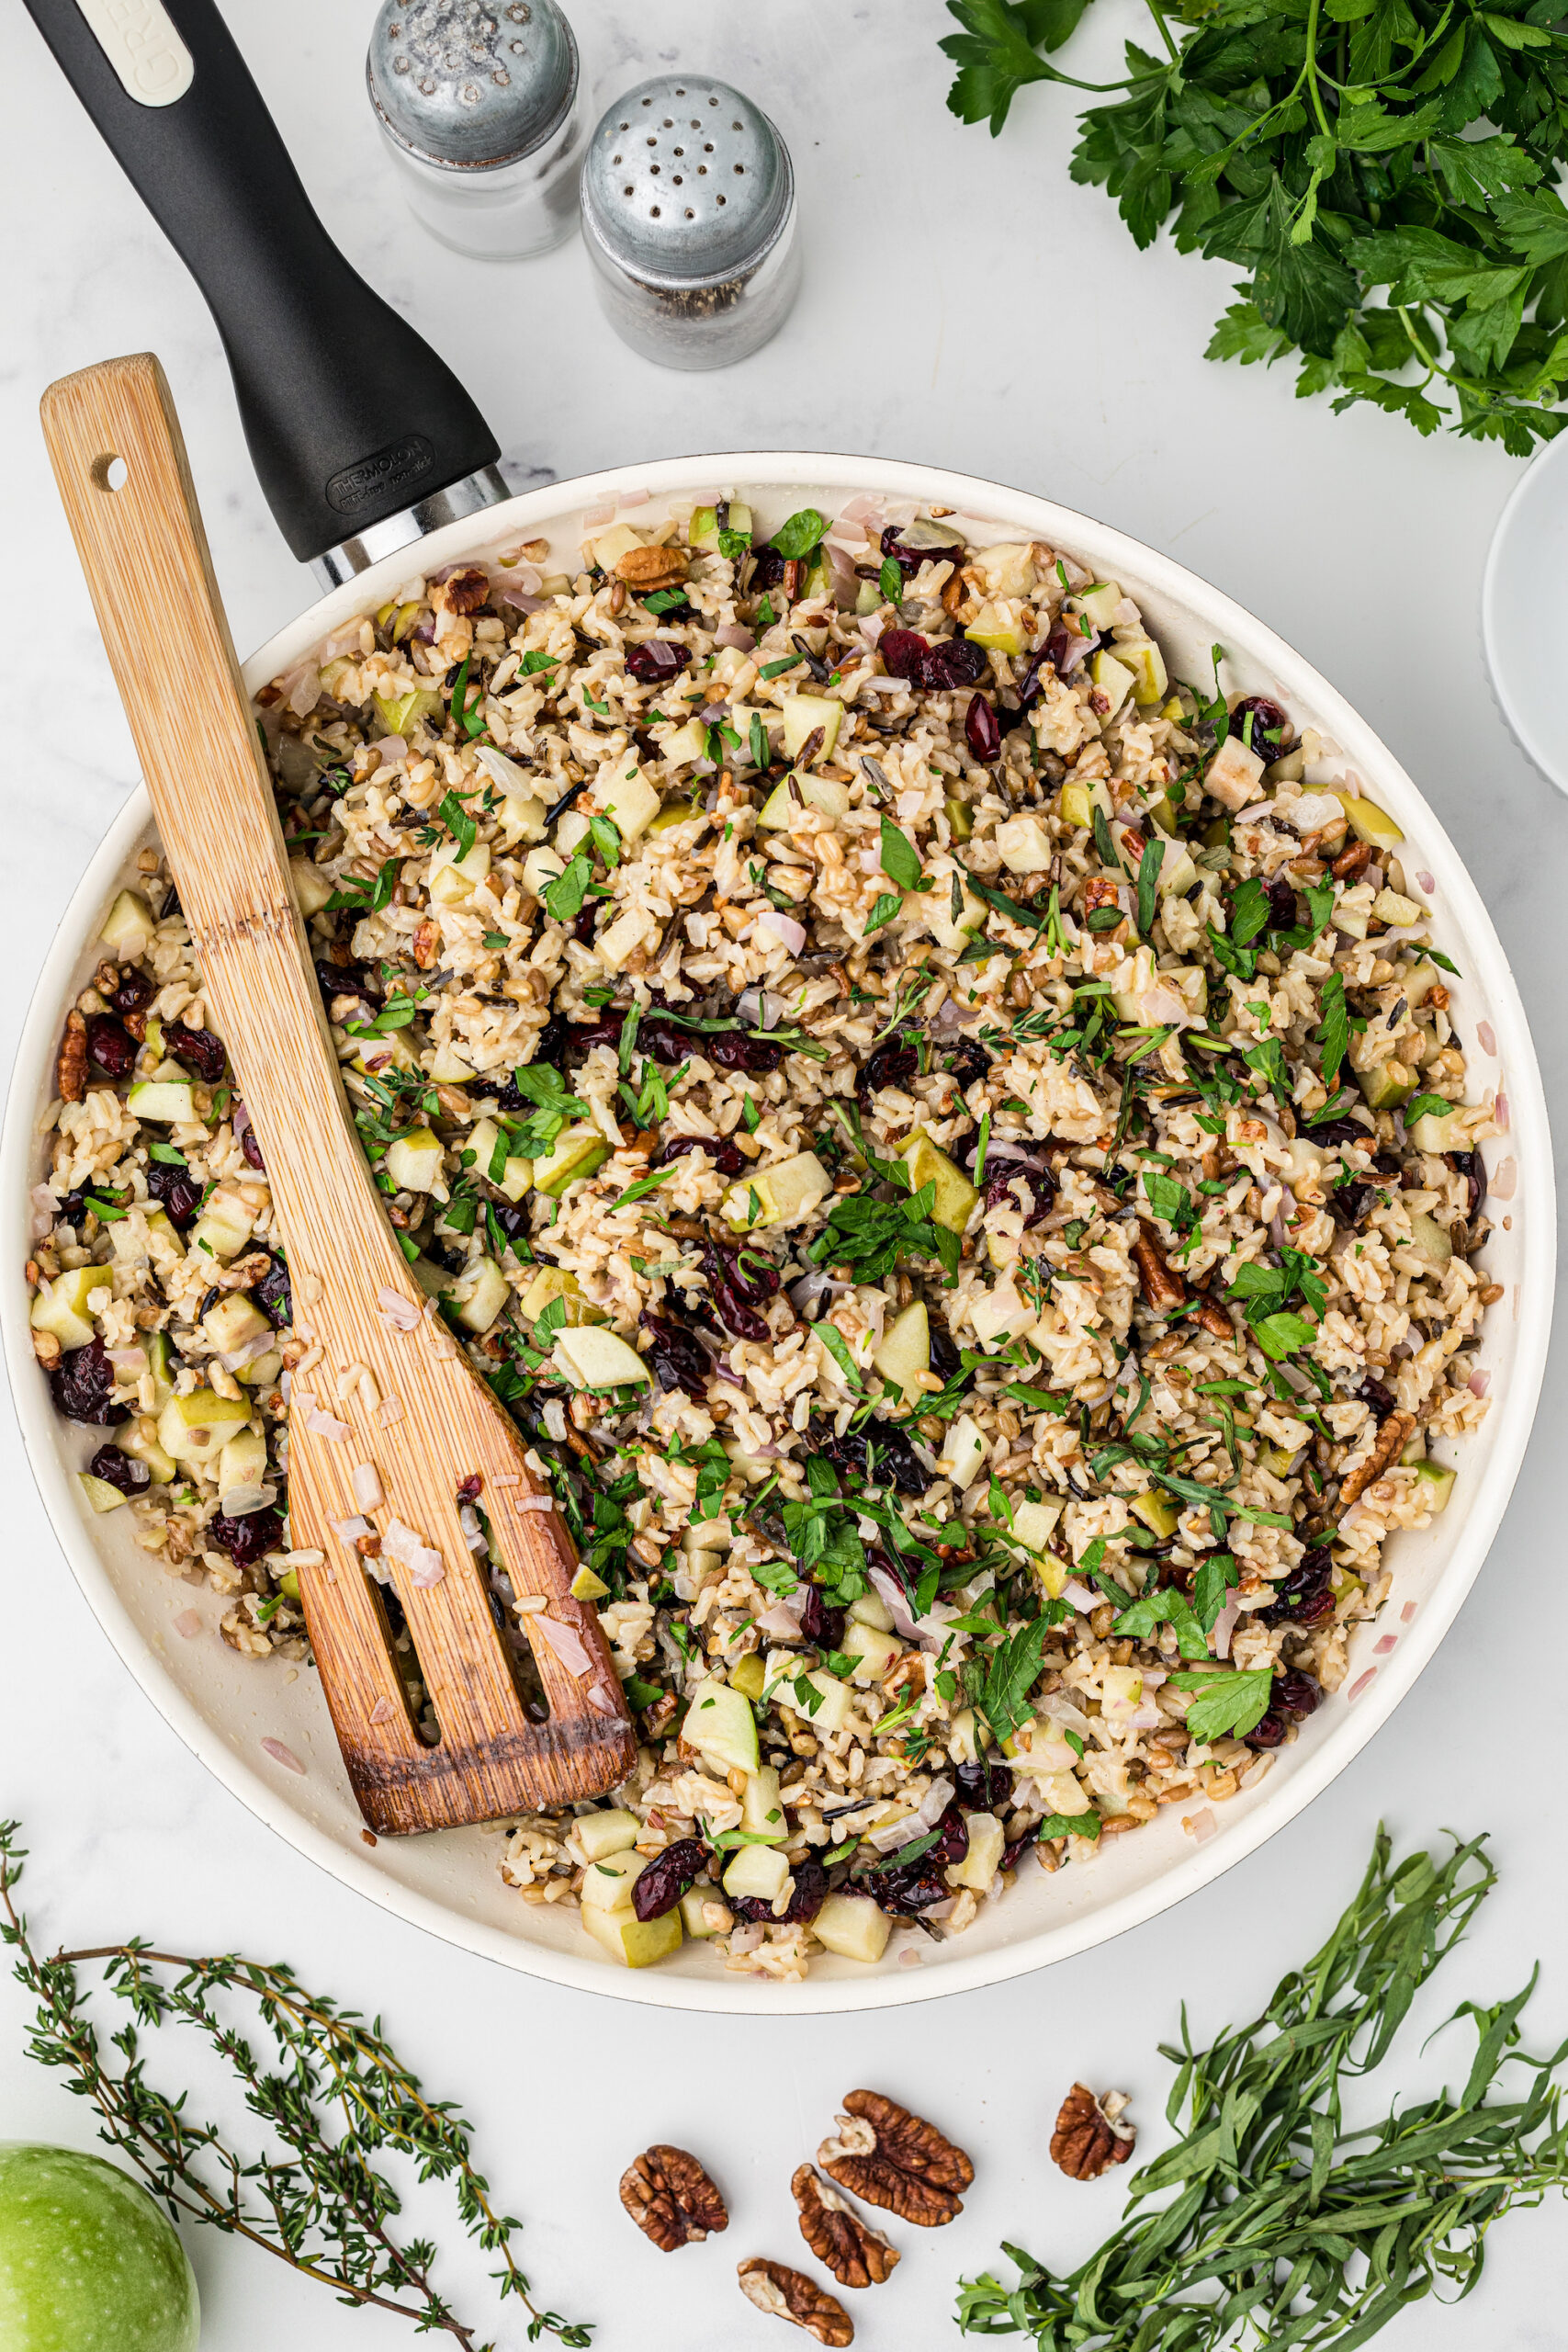 Cranberry Rice Pilaf - This Farm Girl Cooks